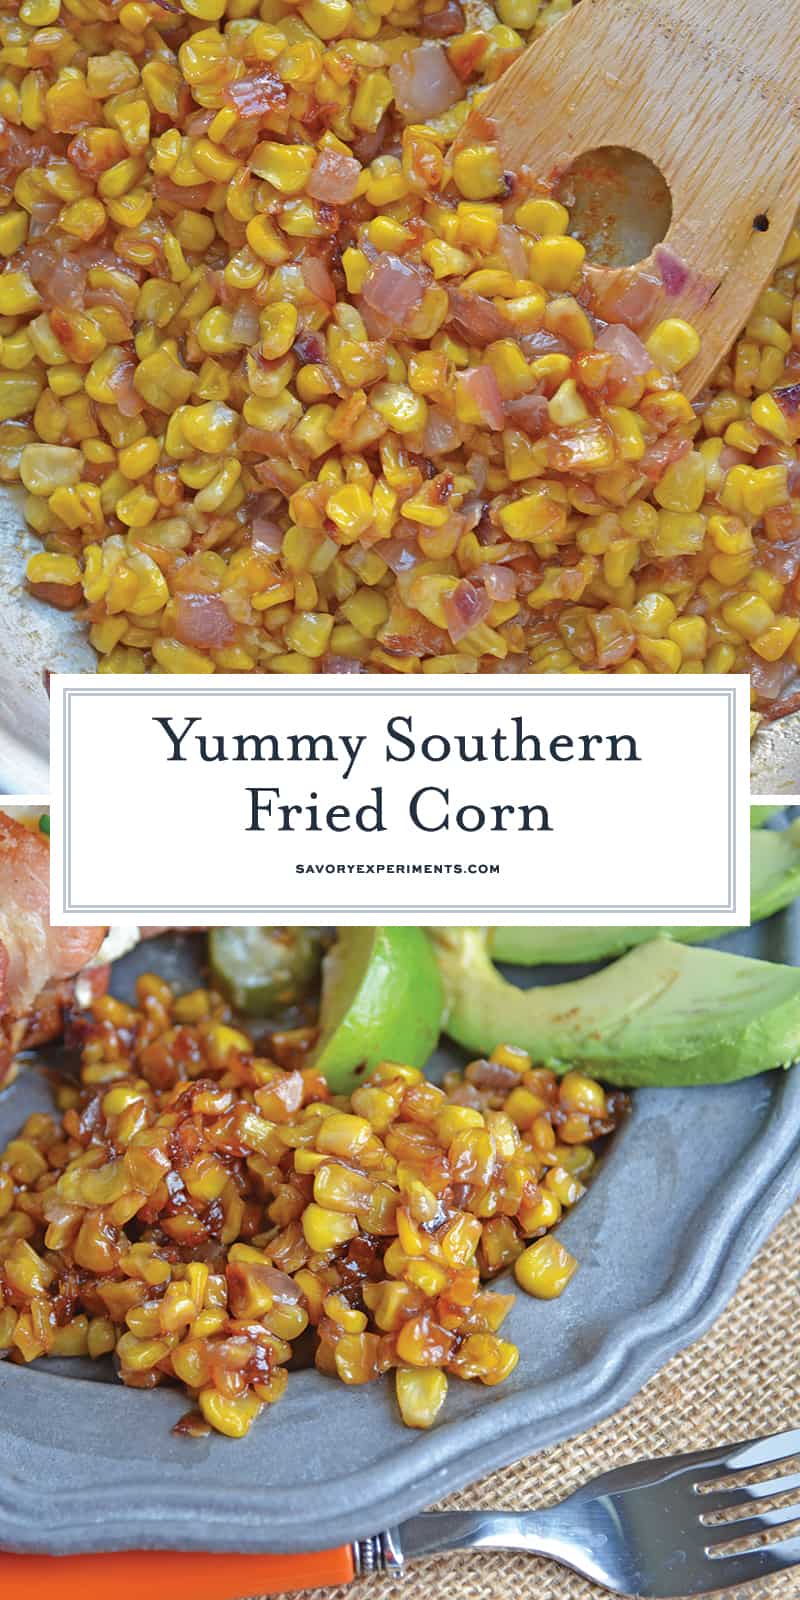 Southern Fried Corn is a simple southern recipe caramelizing corn and onions for a sweet side dish or taco filling! #friedcorn #cornrecipes #easysidedishes www.savoryexperiments.com 